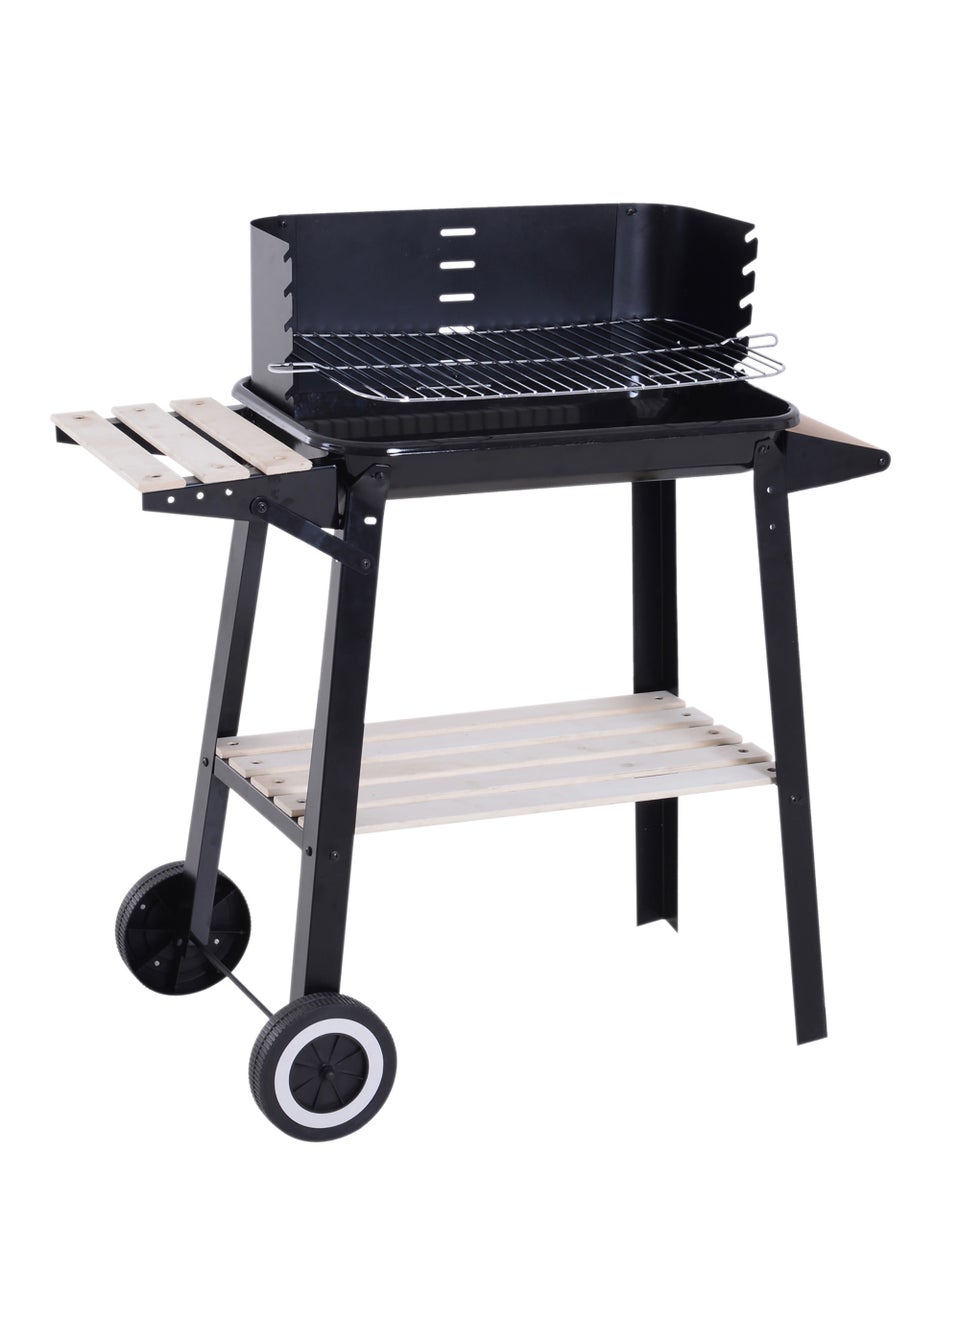 Outsunny Trolley Charcoal BBQ Barbecue Grill with Side Trays Storage Shelf and Wheels